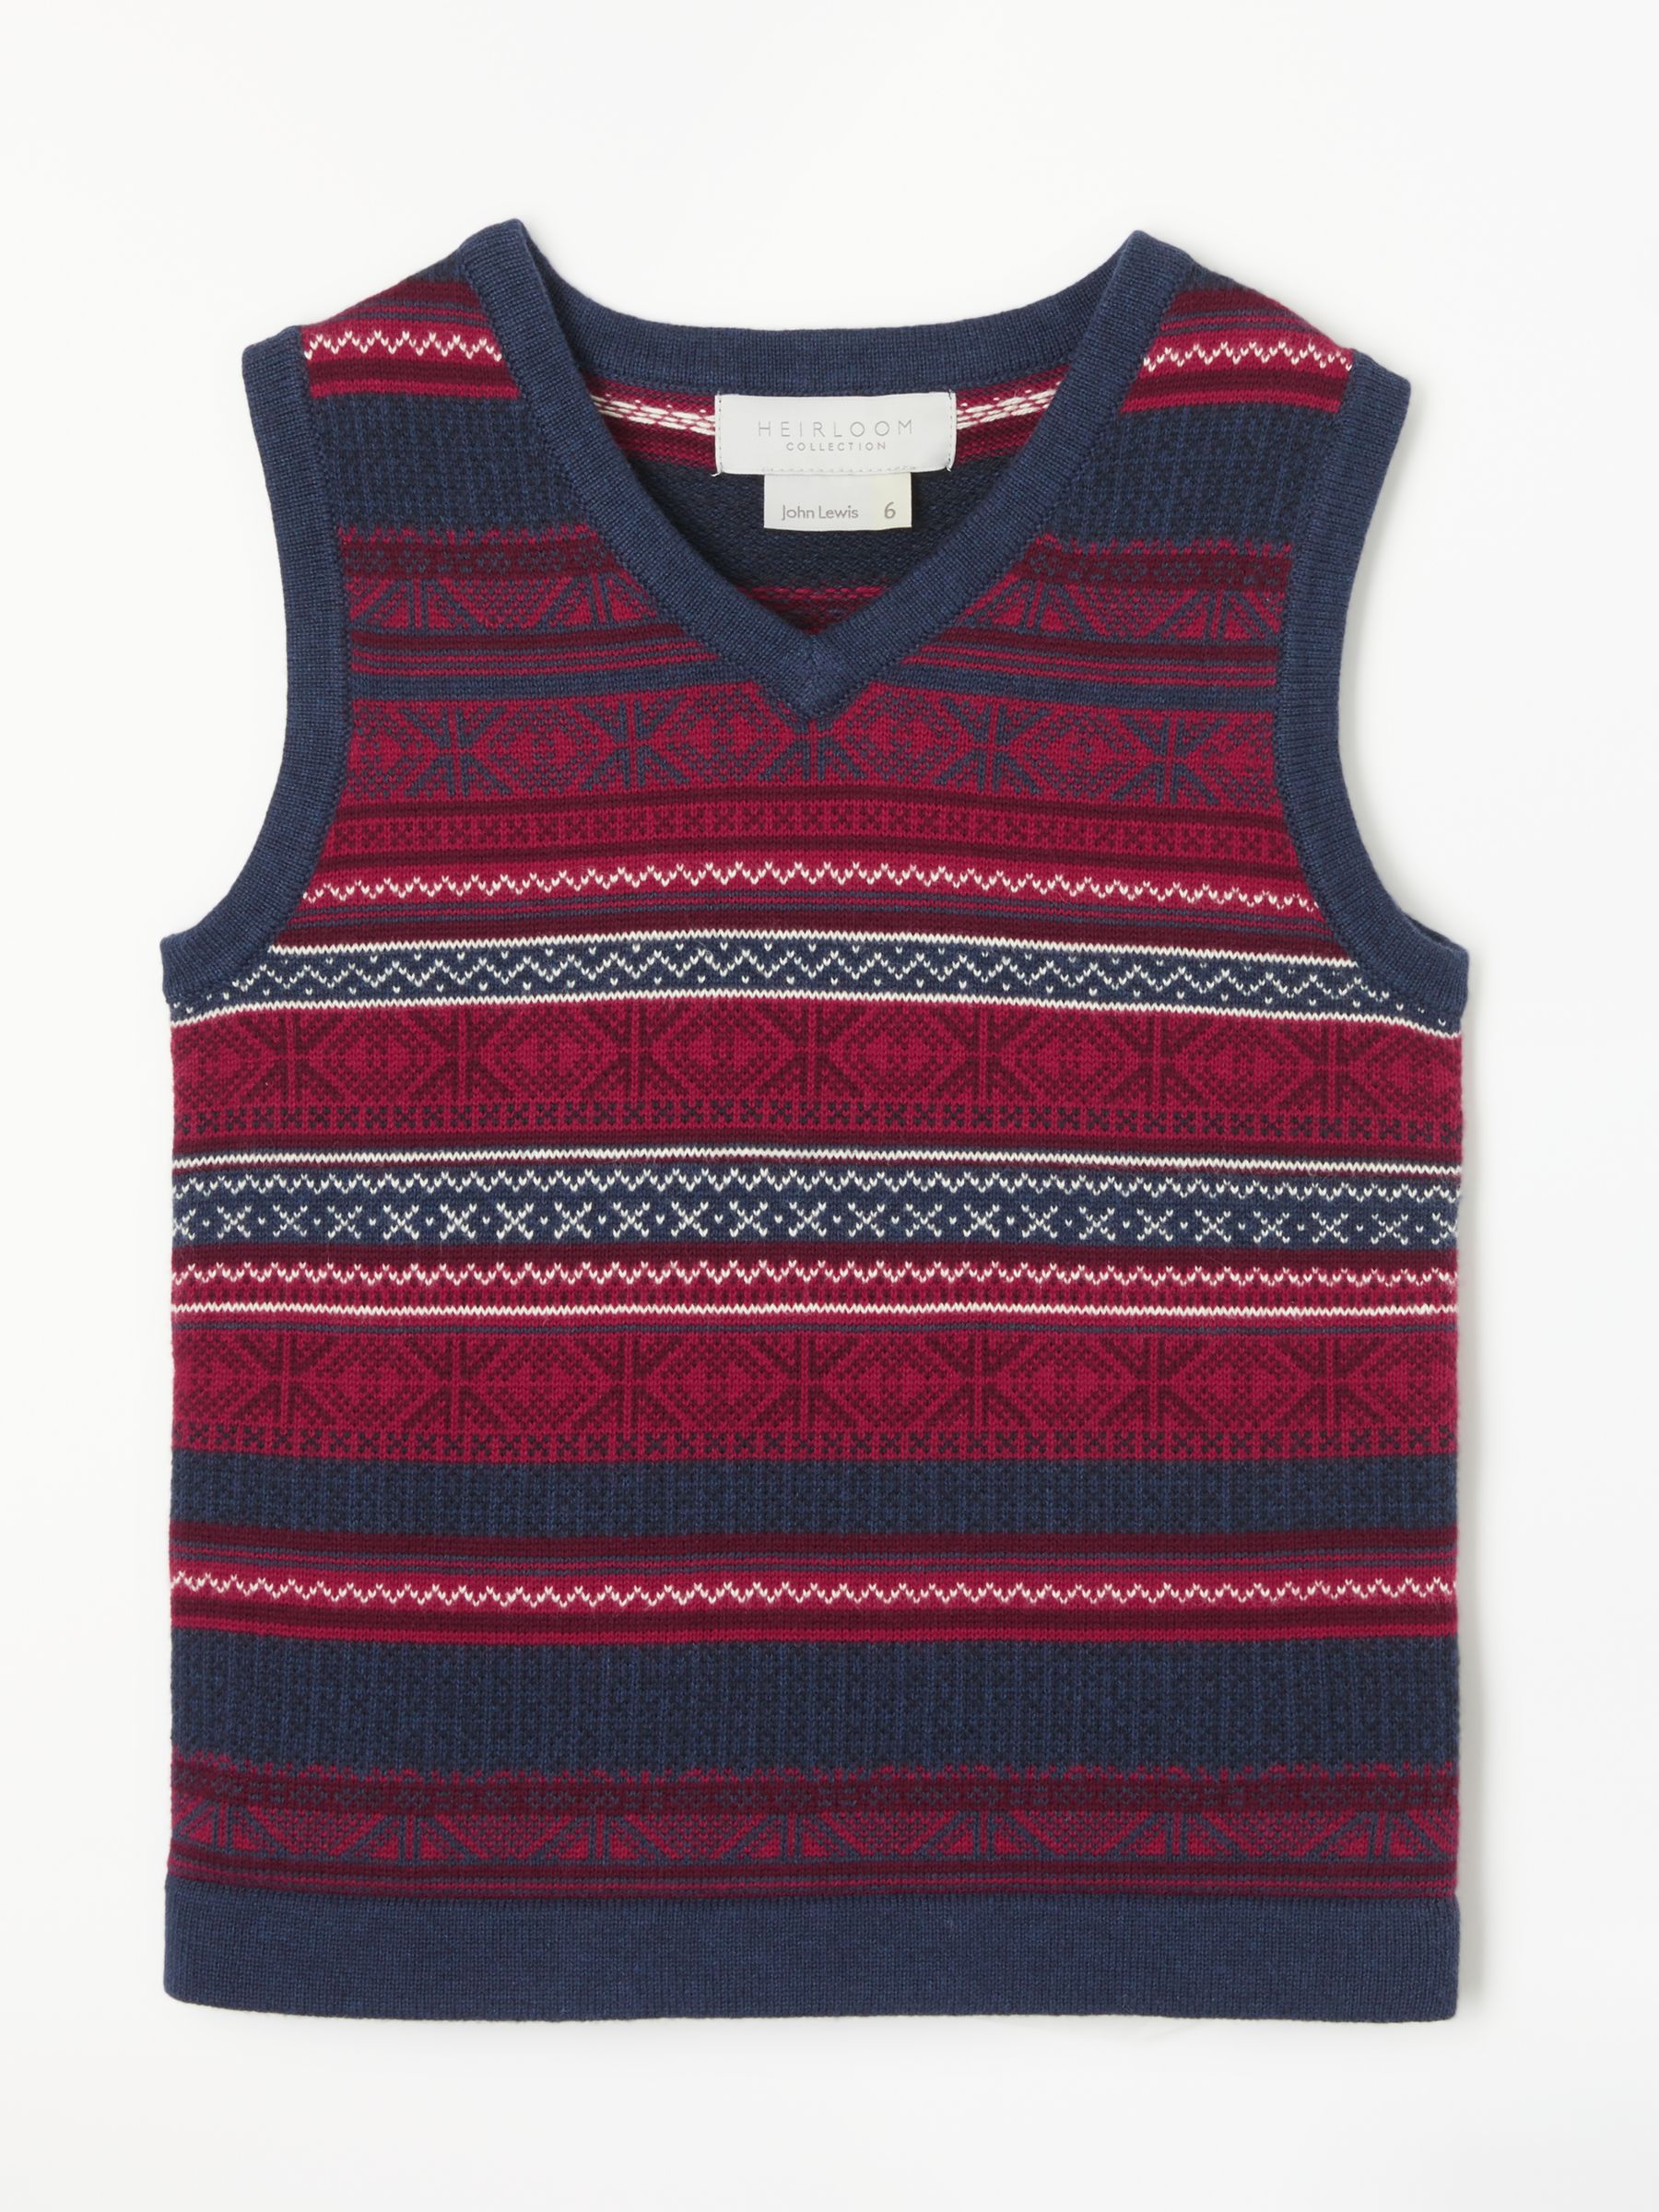 John Lewis & Partners Heirloom Collection Boys' Fair Isle Knitted Tank Top, Navy/Red